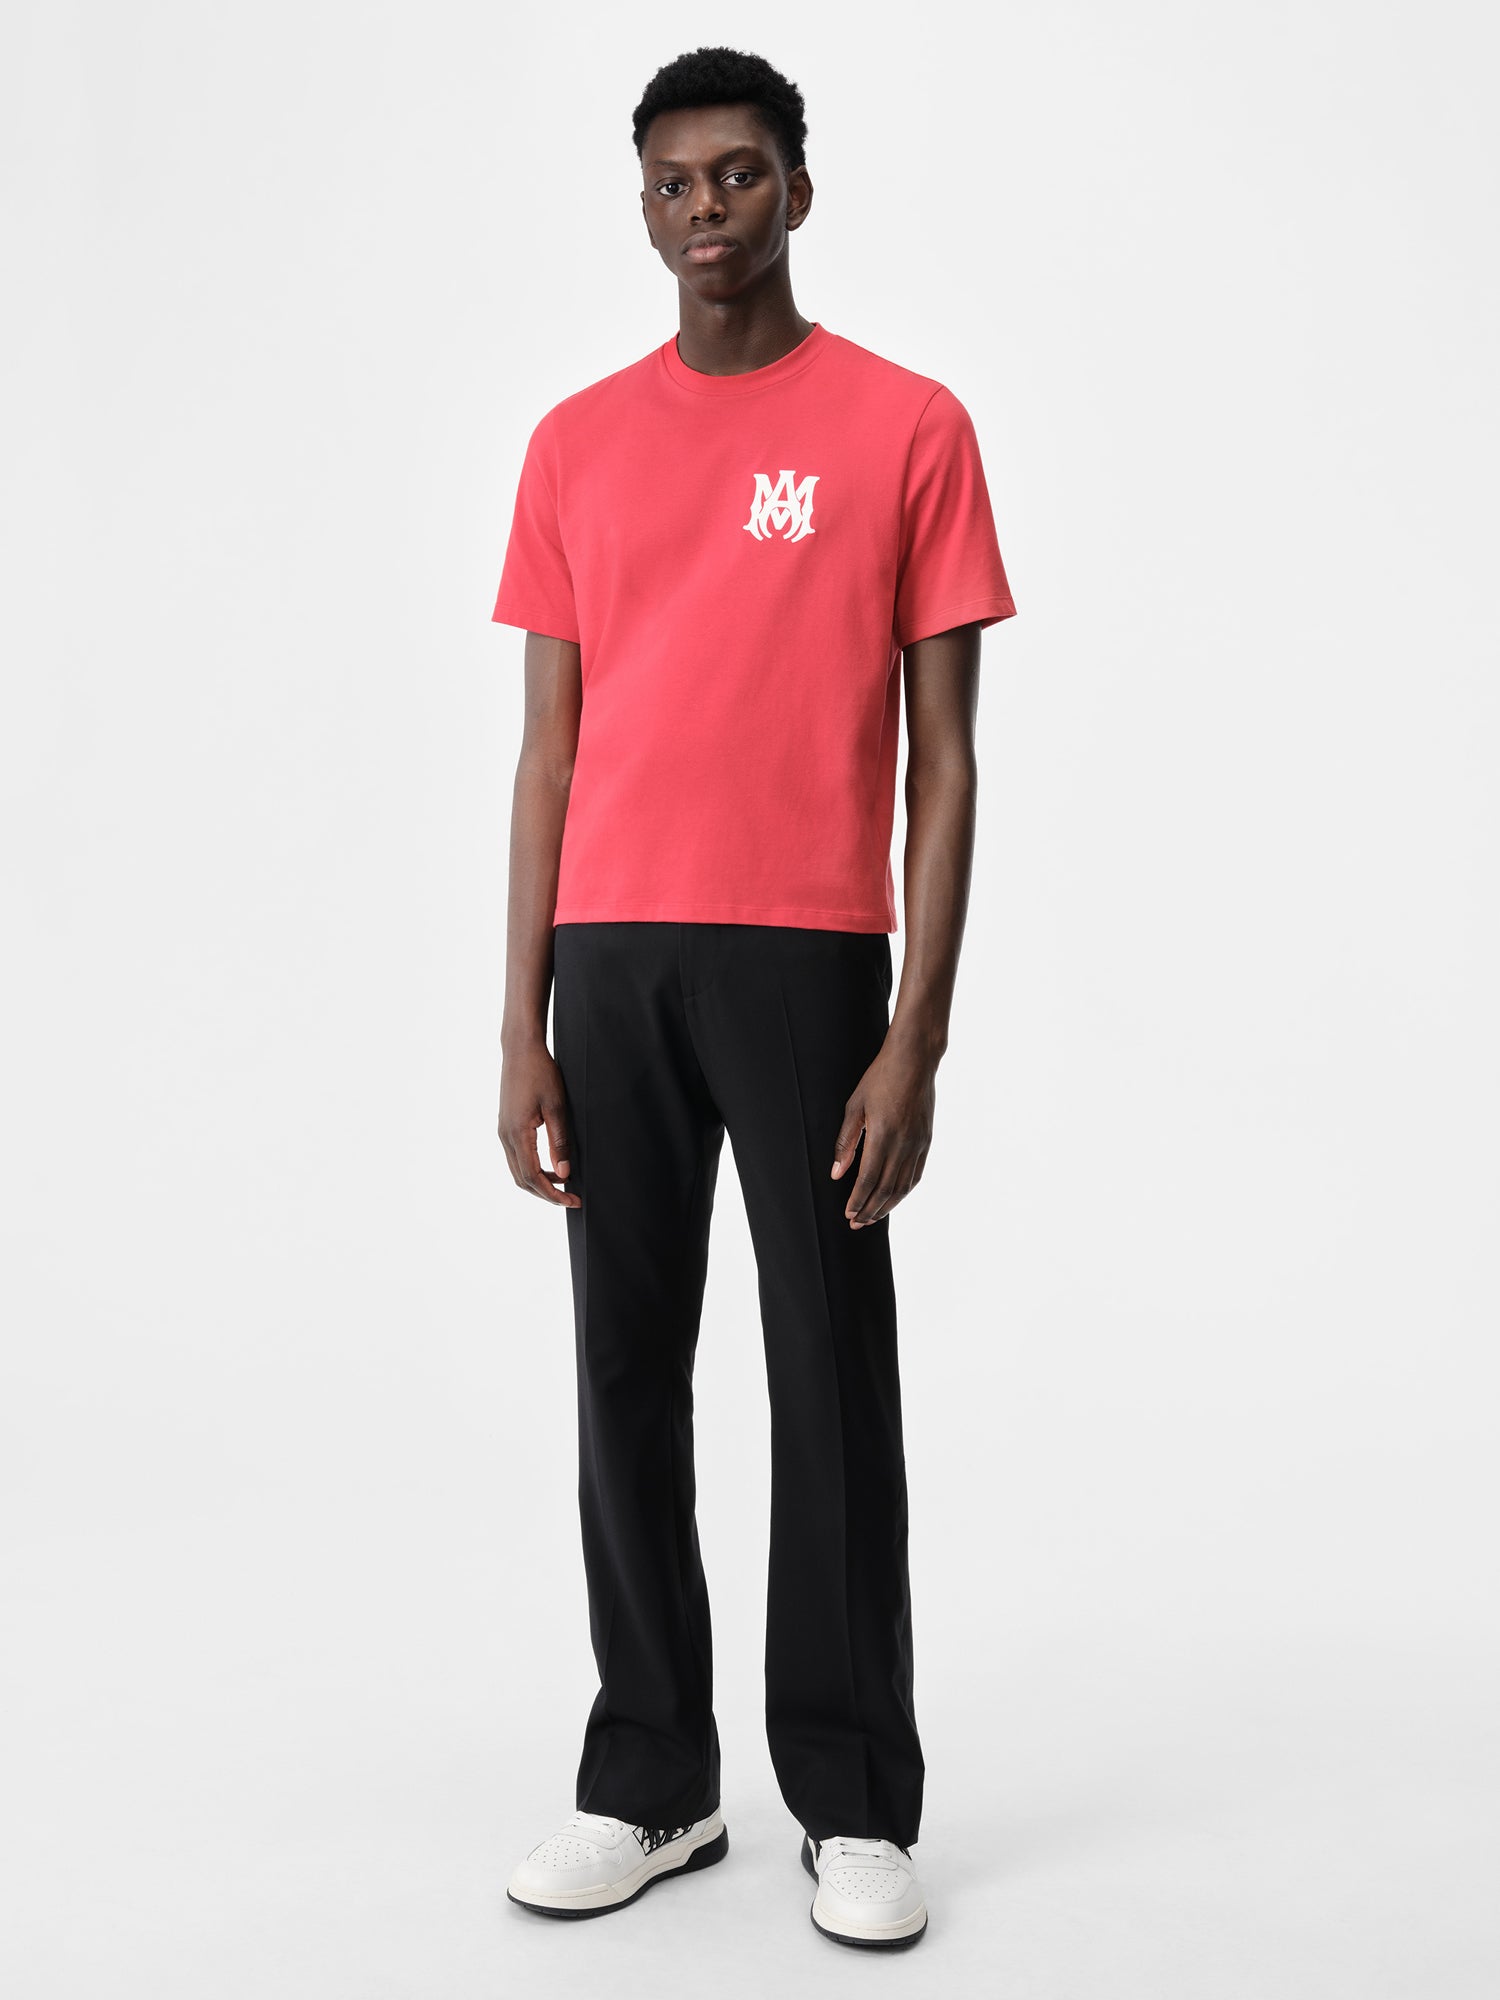 Product MA CORE LOGO TEE - Red featured image